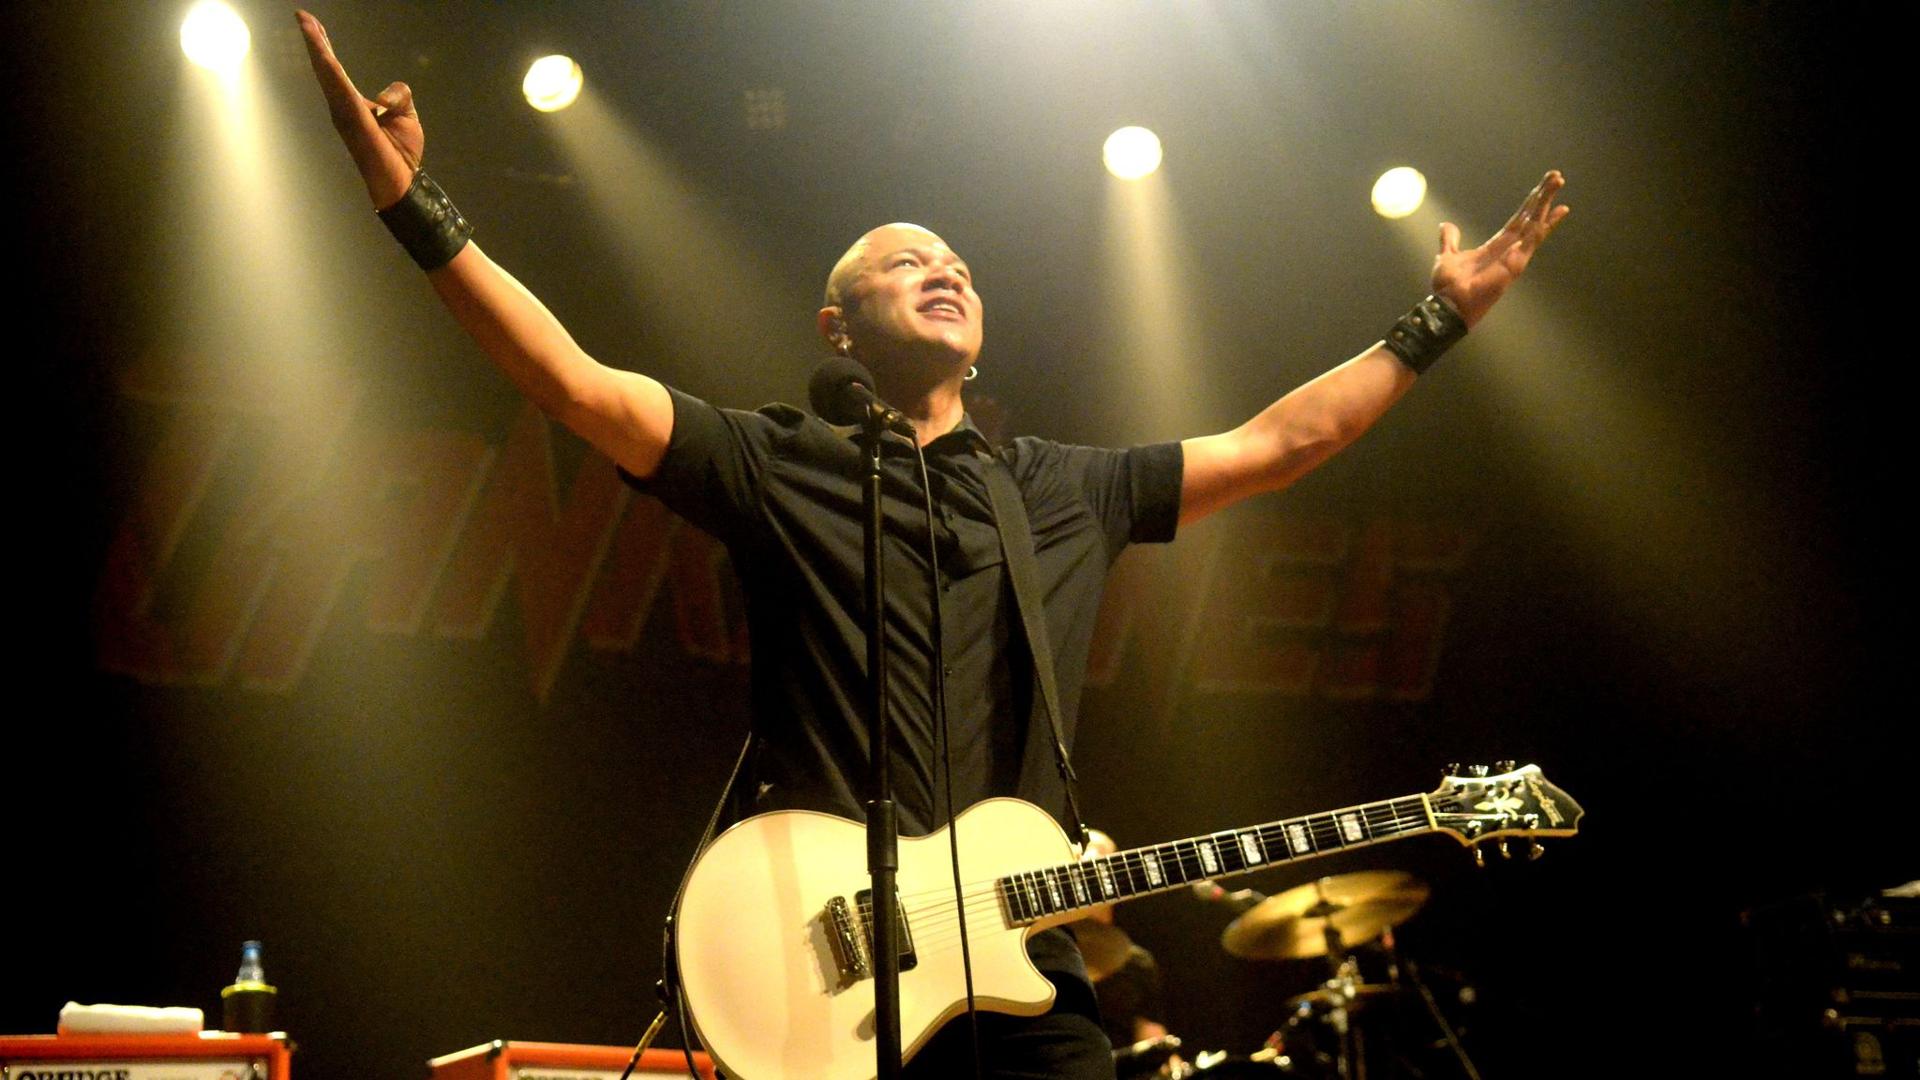 Danko Jones and the United Forces of Rock And Roll